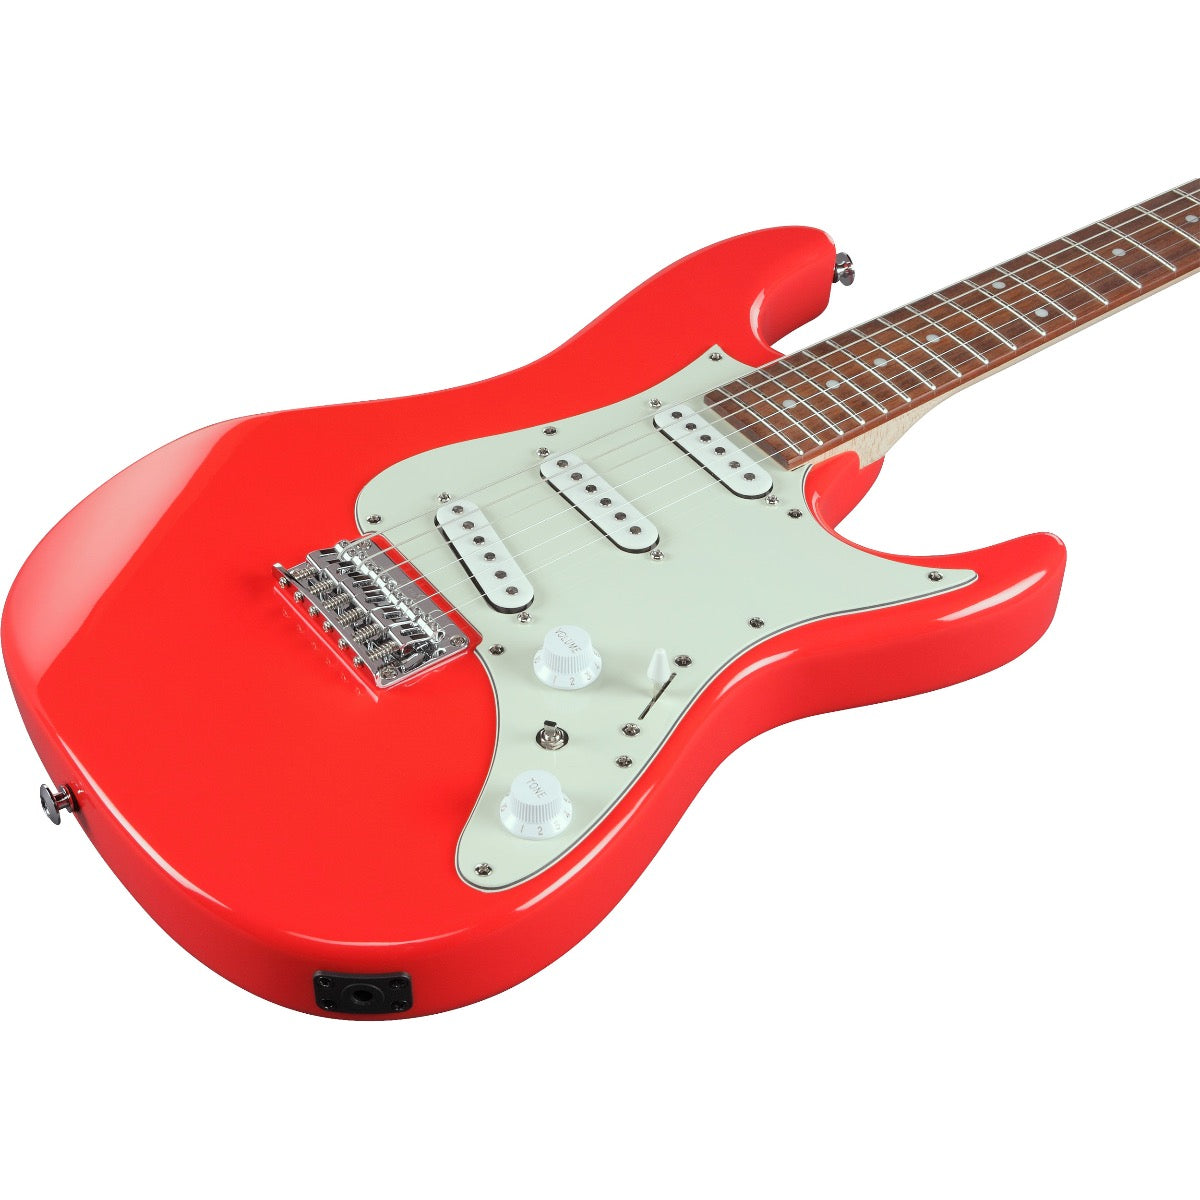 Close-up perspective view of Ibanez AZES31 Electric Guitar - Vermilion showing top and right side of body and portion of fingerboard